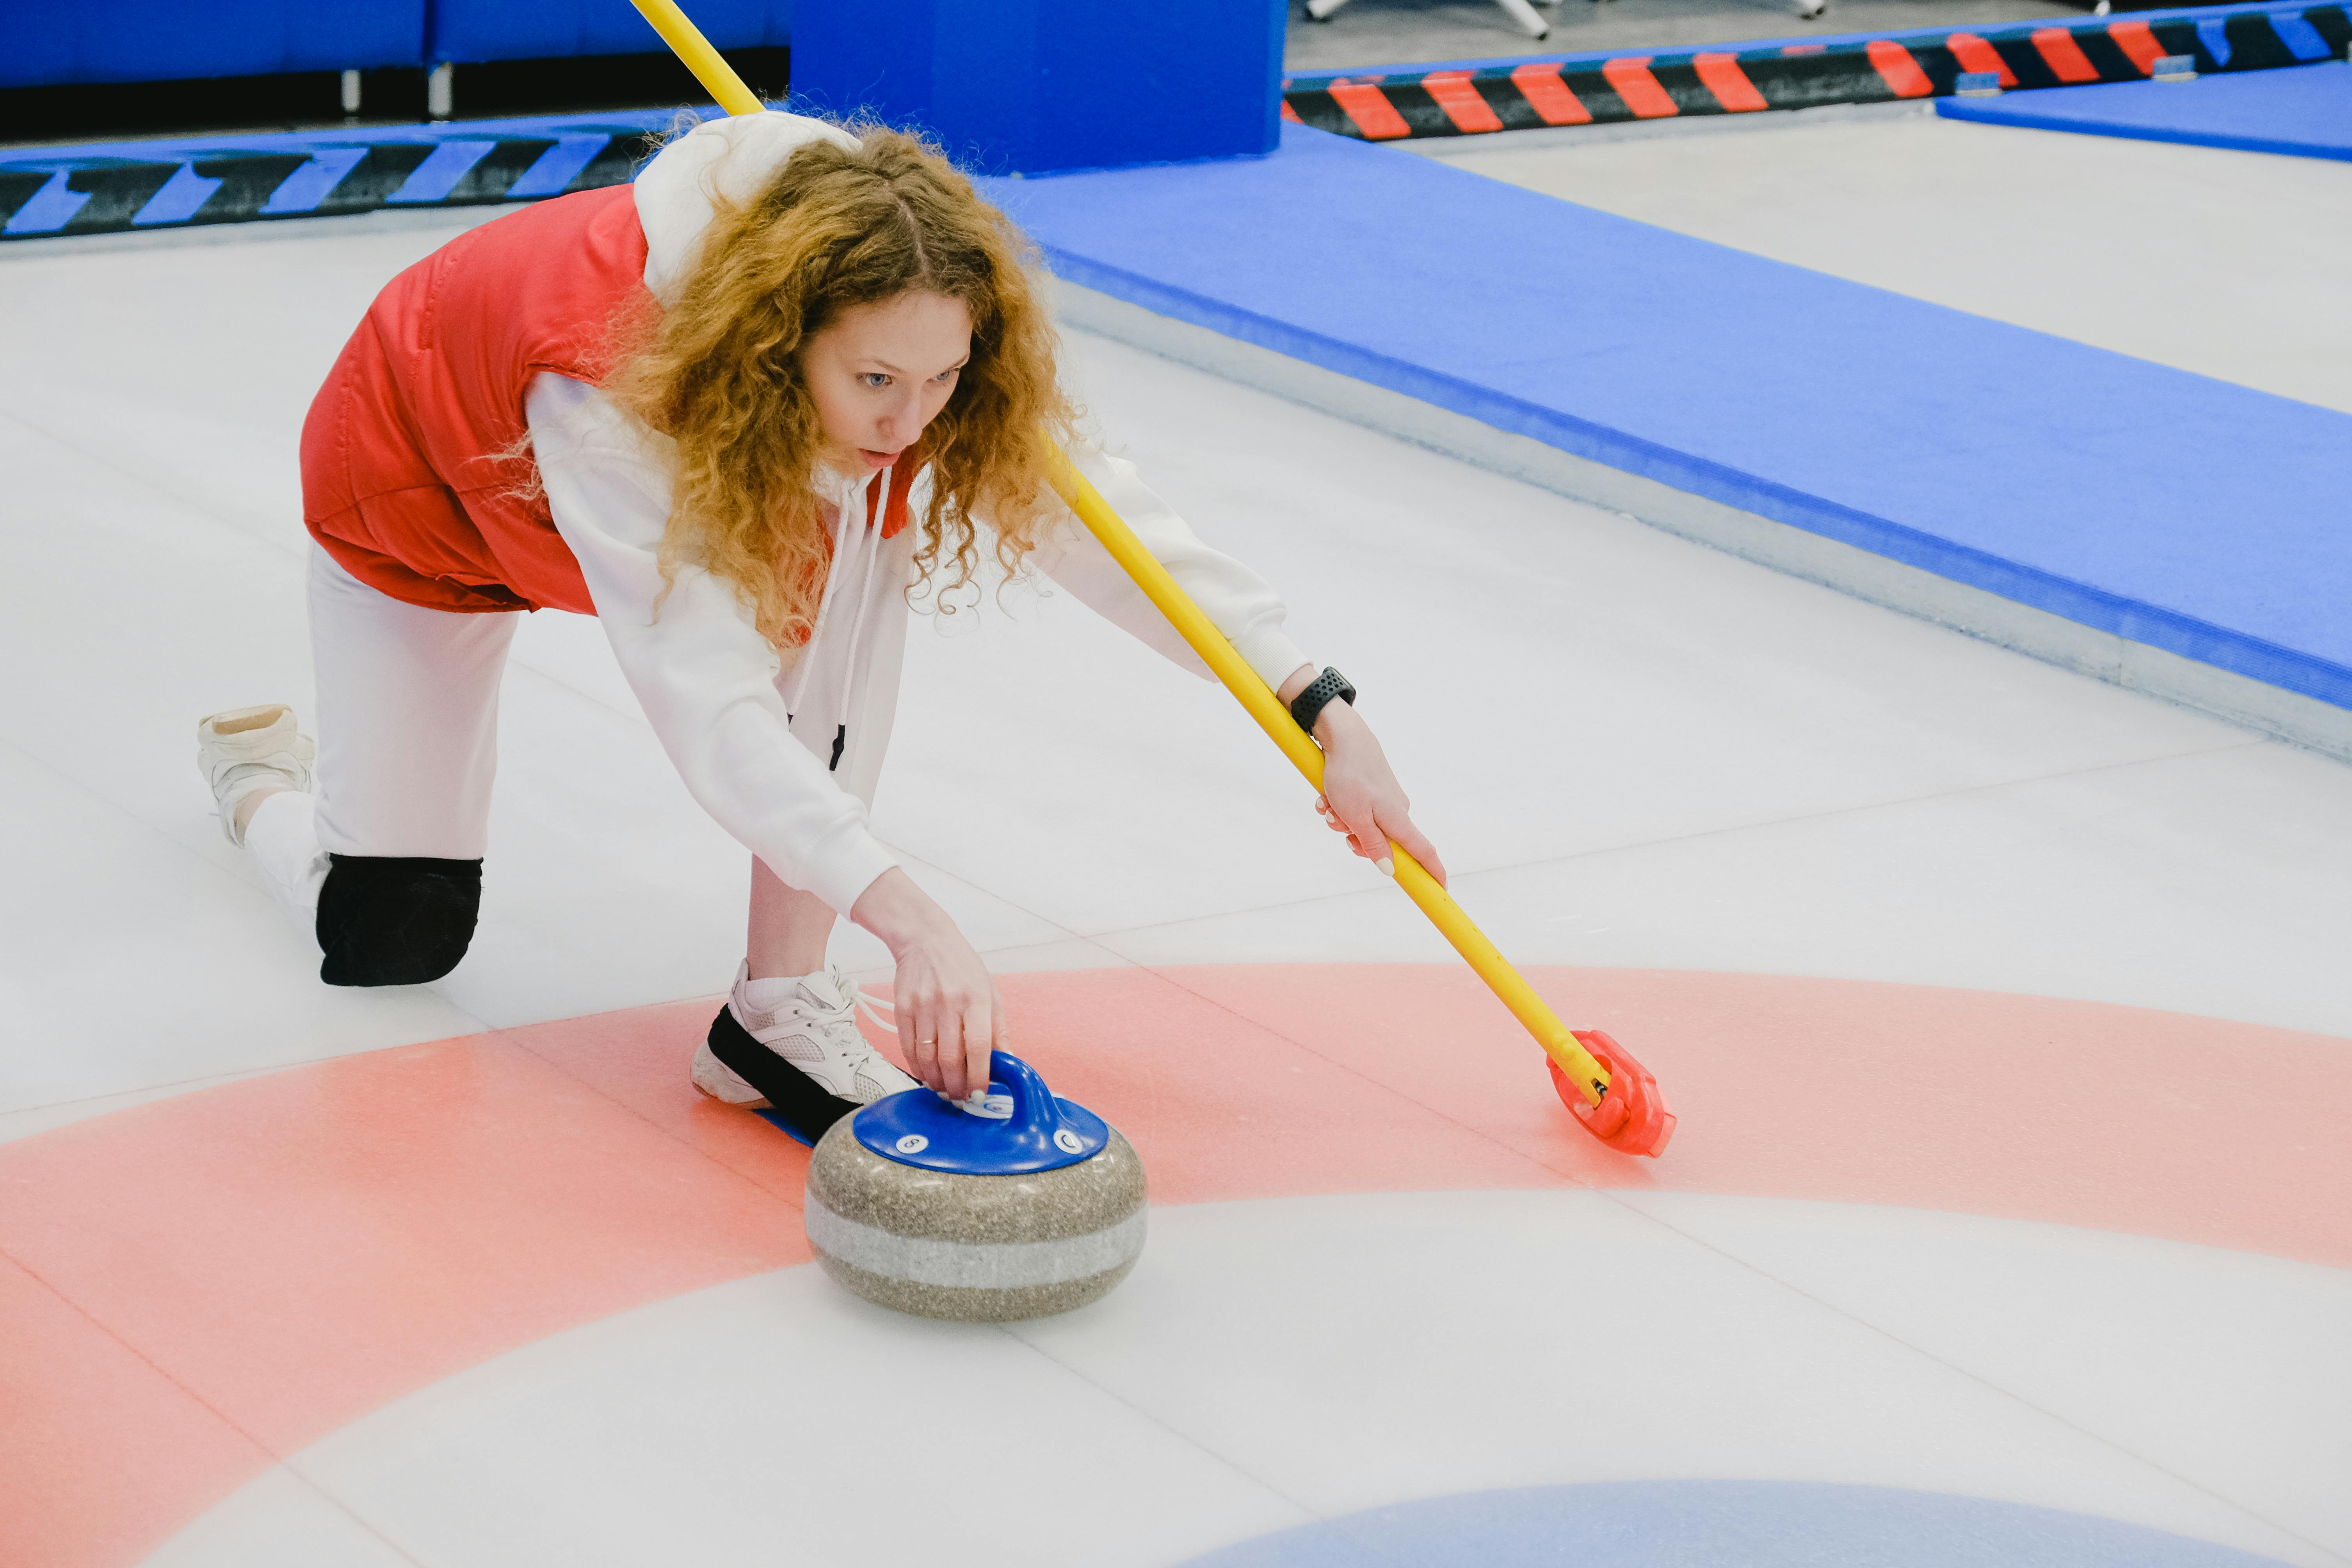 determined woman throwing curling stone